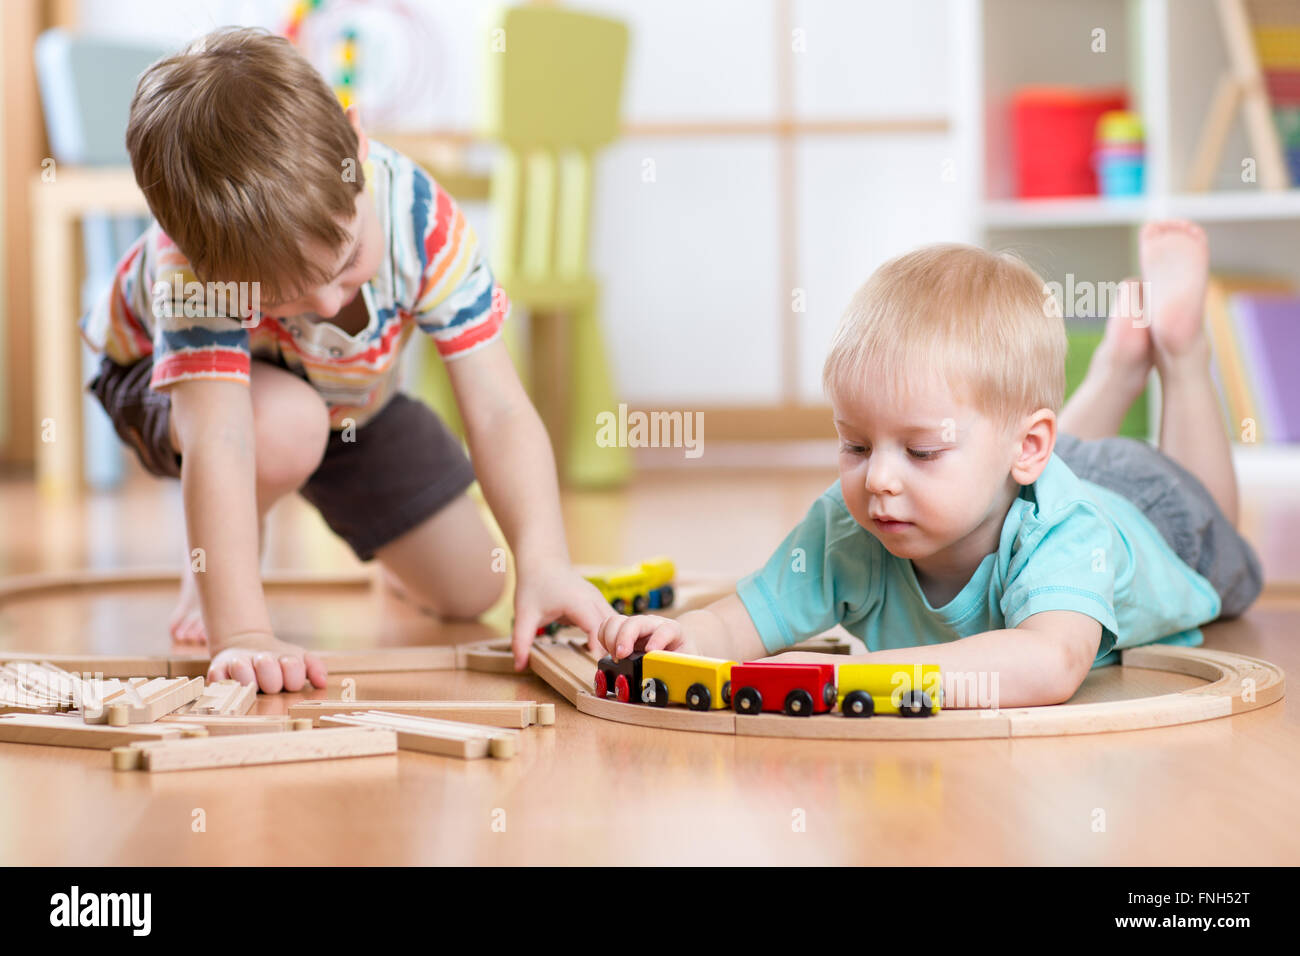 Cute children playing with wooden train. Toddler kids play with blocks and trains. Boys building toy railroad at home or daycare. Stock Photo